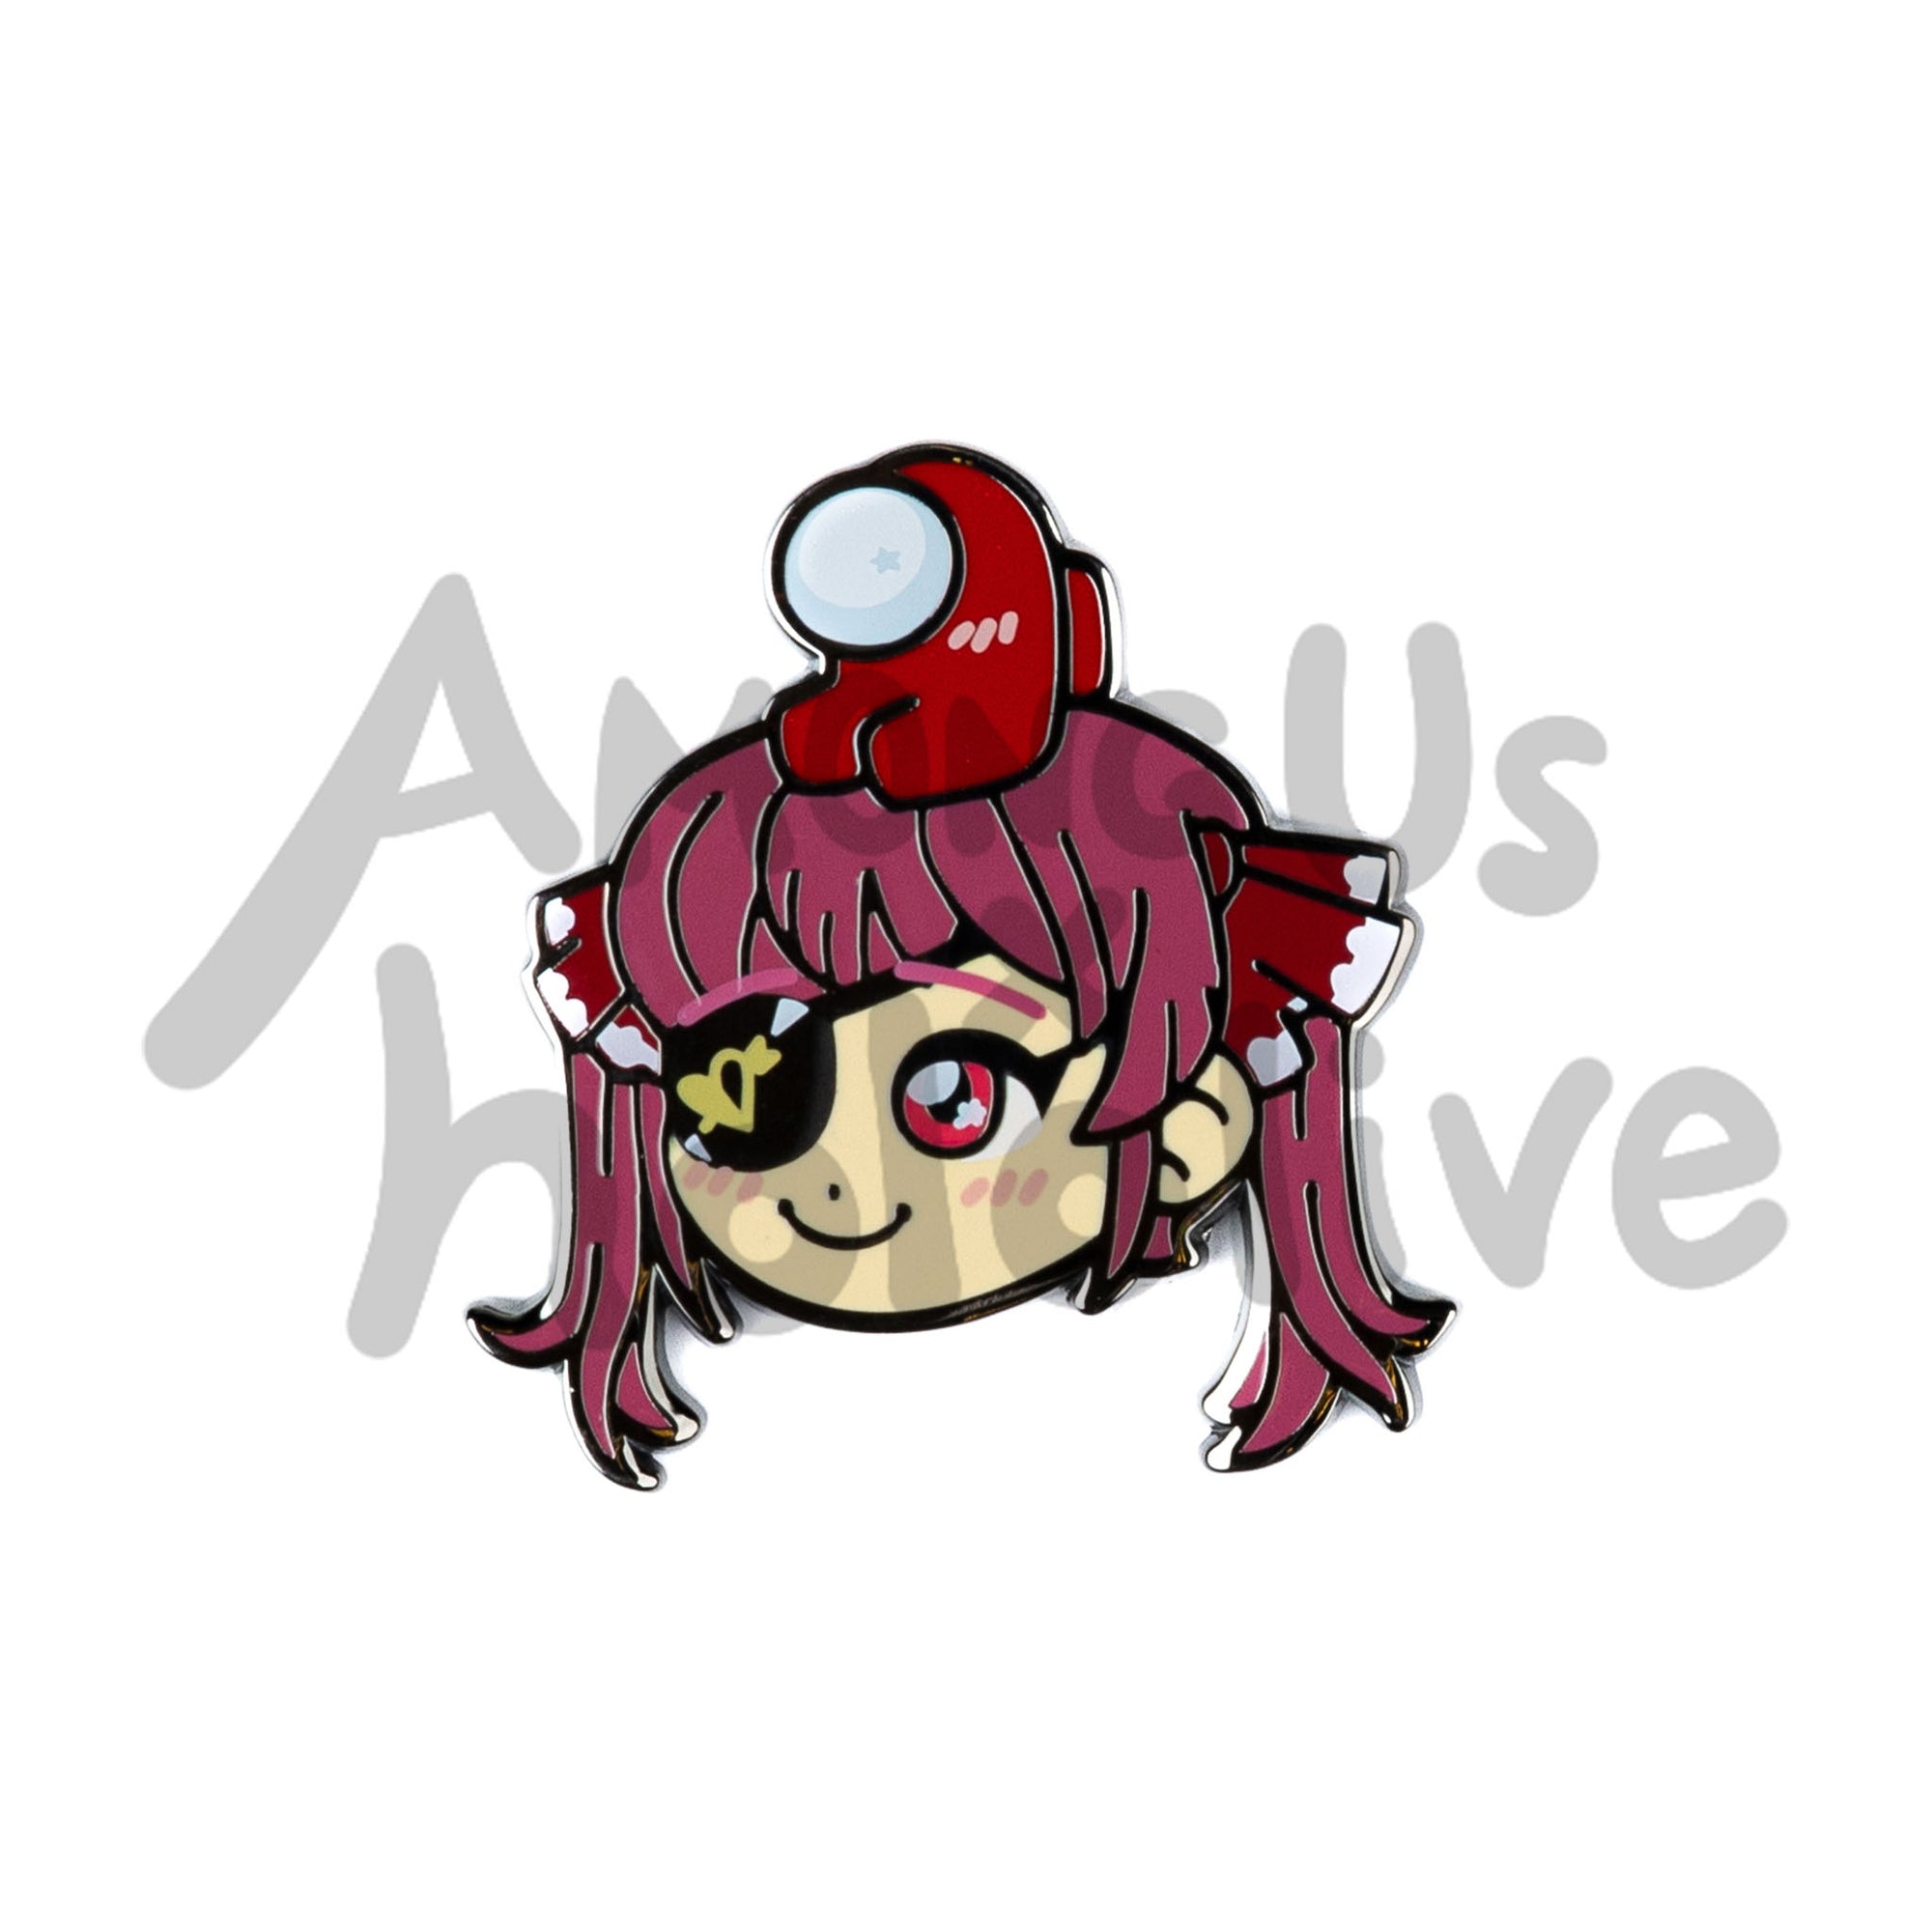 Enamel Pin of Houshou Marine's Face from Hololive. Marine has fair skin, crismon sparkly eyes, and red hair tied into long pigtails. Her hair ribbons are pleated red and white bows. She wears a black eyepatch with a gold heart and arrow. There's a Red Crewmate sitting atop her head. Both characters have pink blush marks on their face. 